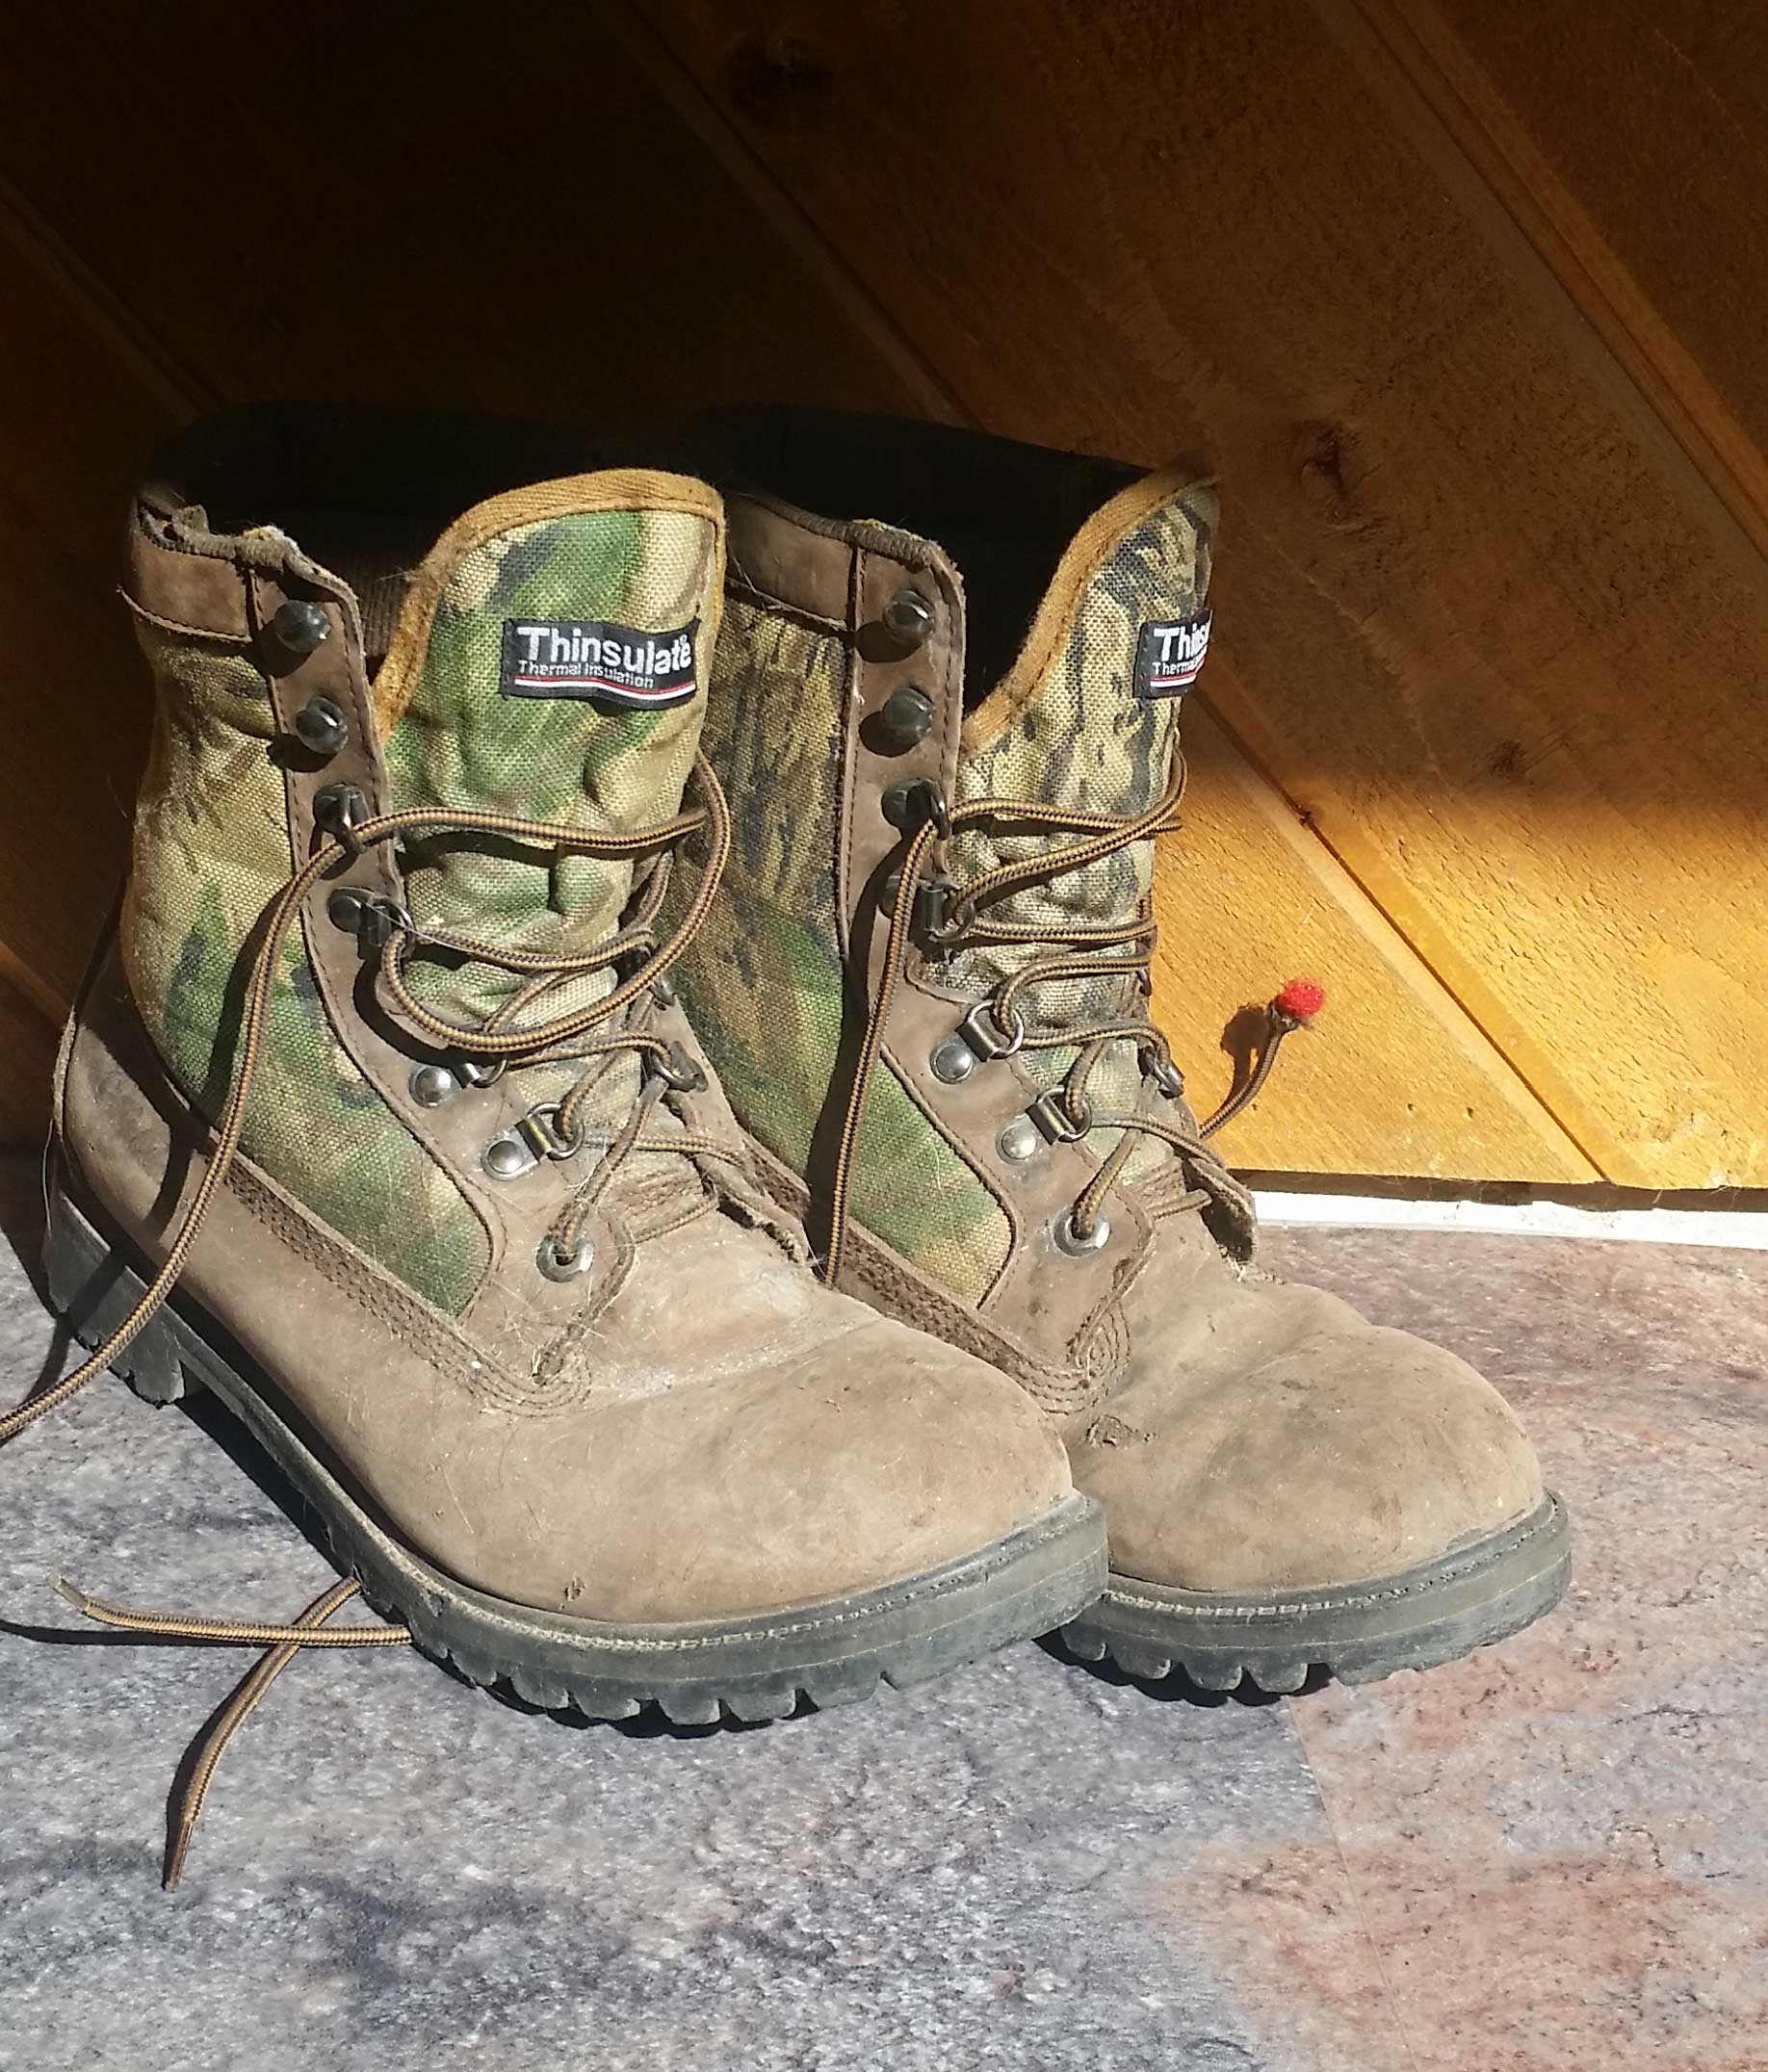 Elk Hunting Boots - 5 Important Choices - Elk Hunters Guide